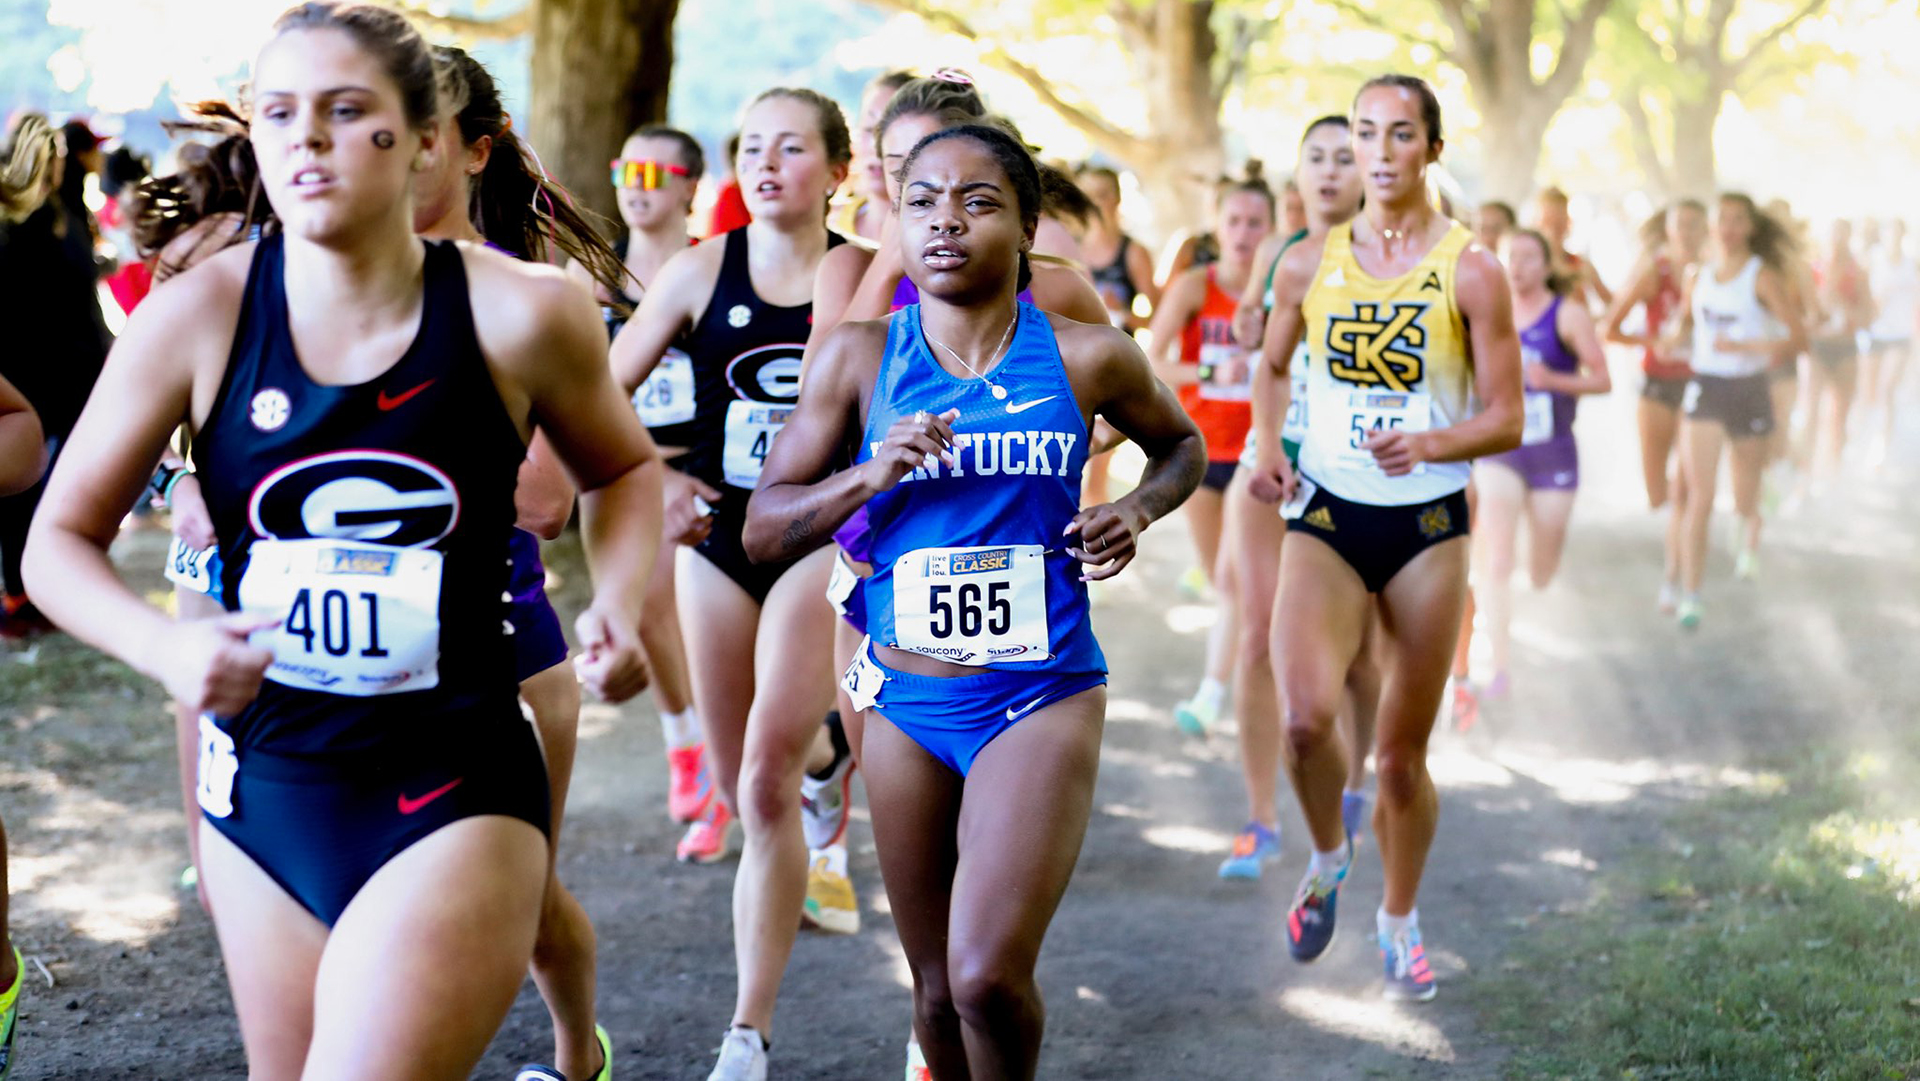 UK Women’s Varsity Cross Country Team Announces Open Tryout Information